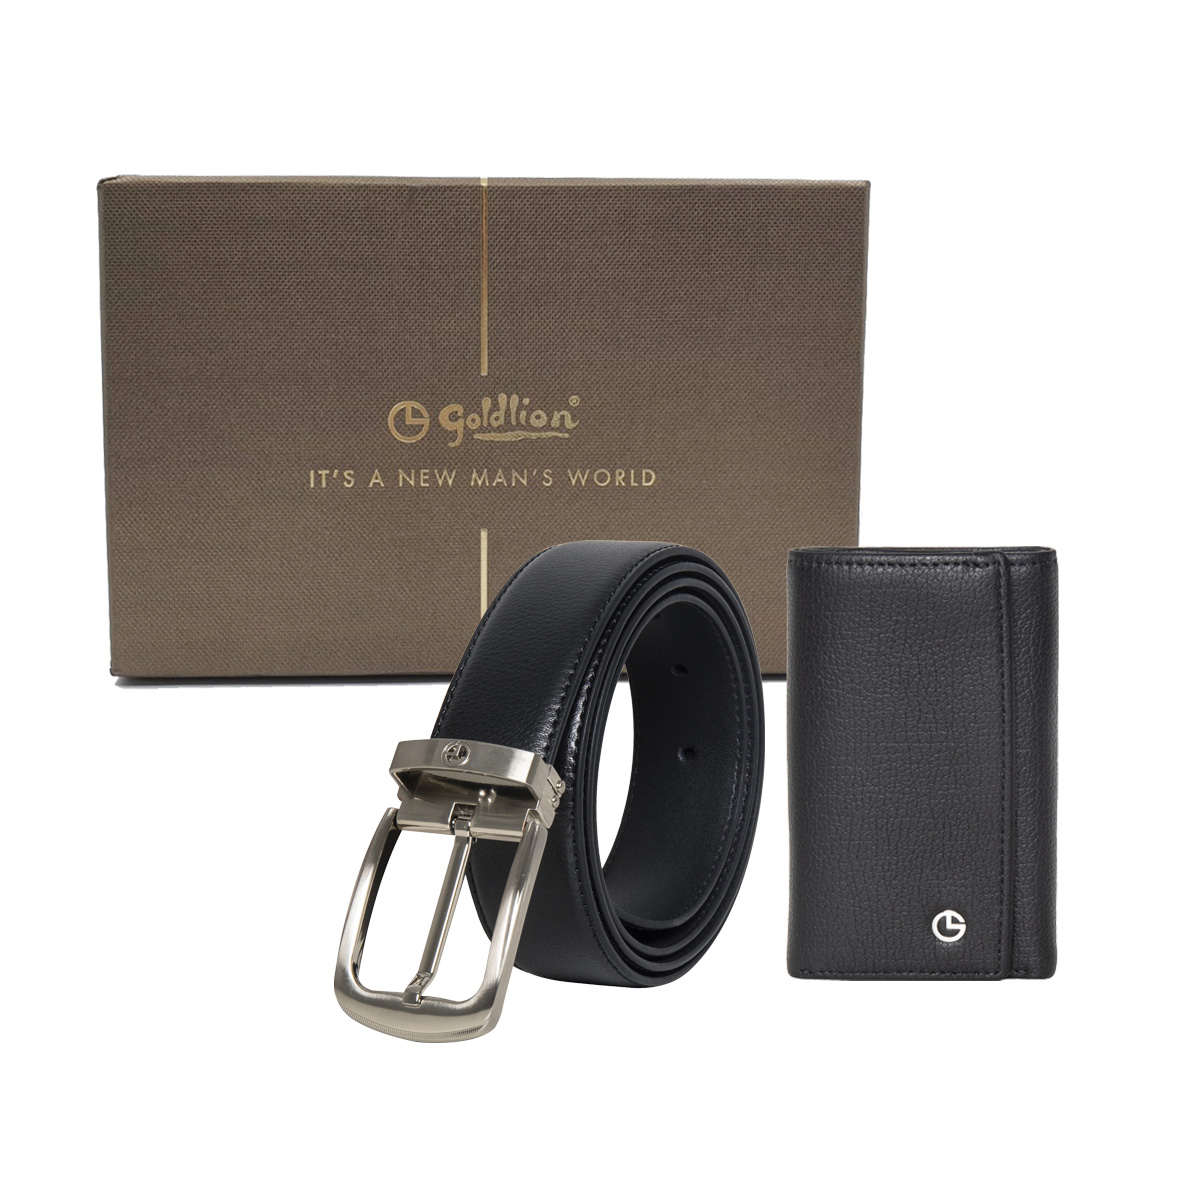 [Online Exclusive] Goldlion Genuine Leather Key Pouch & Pin Belt Gift Set